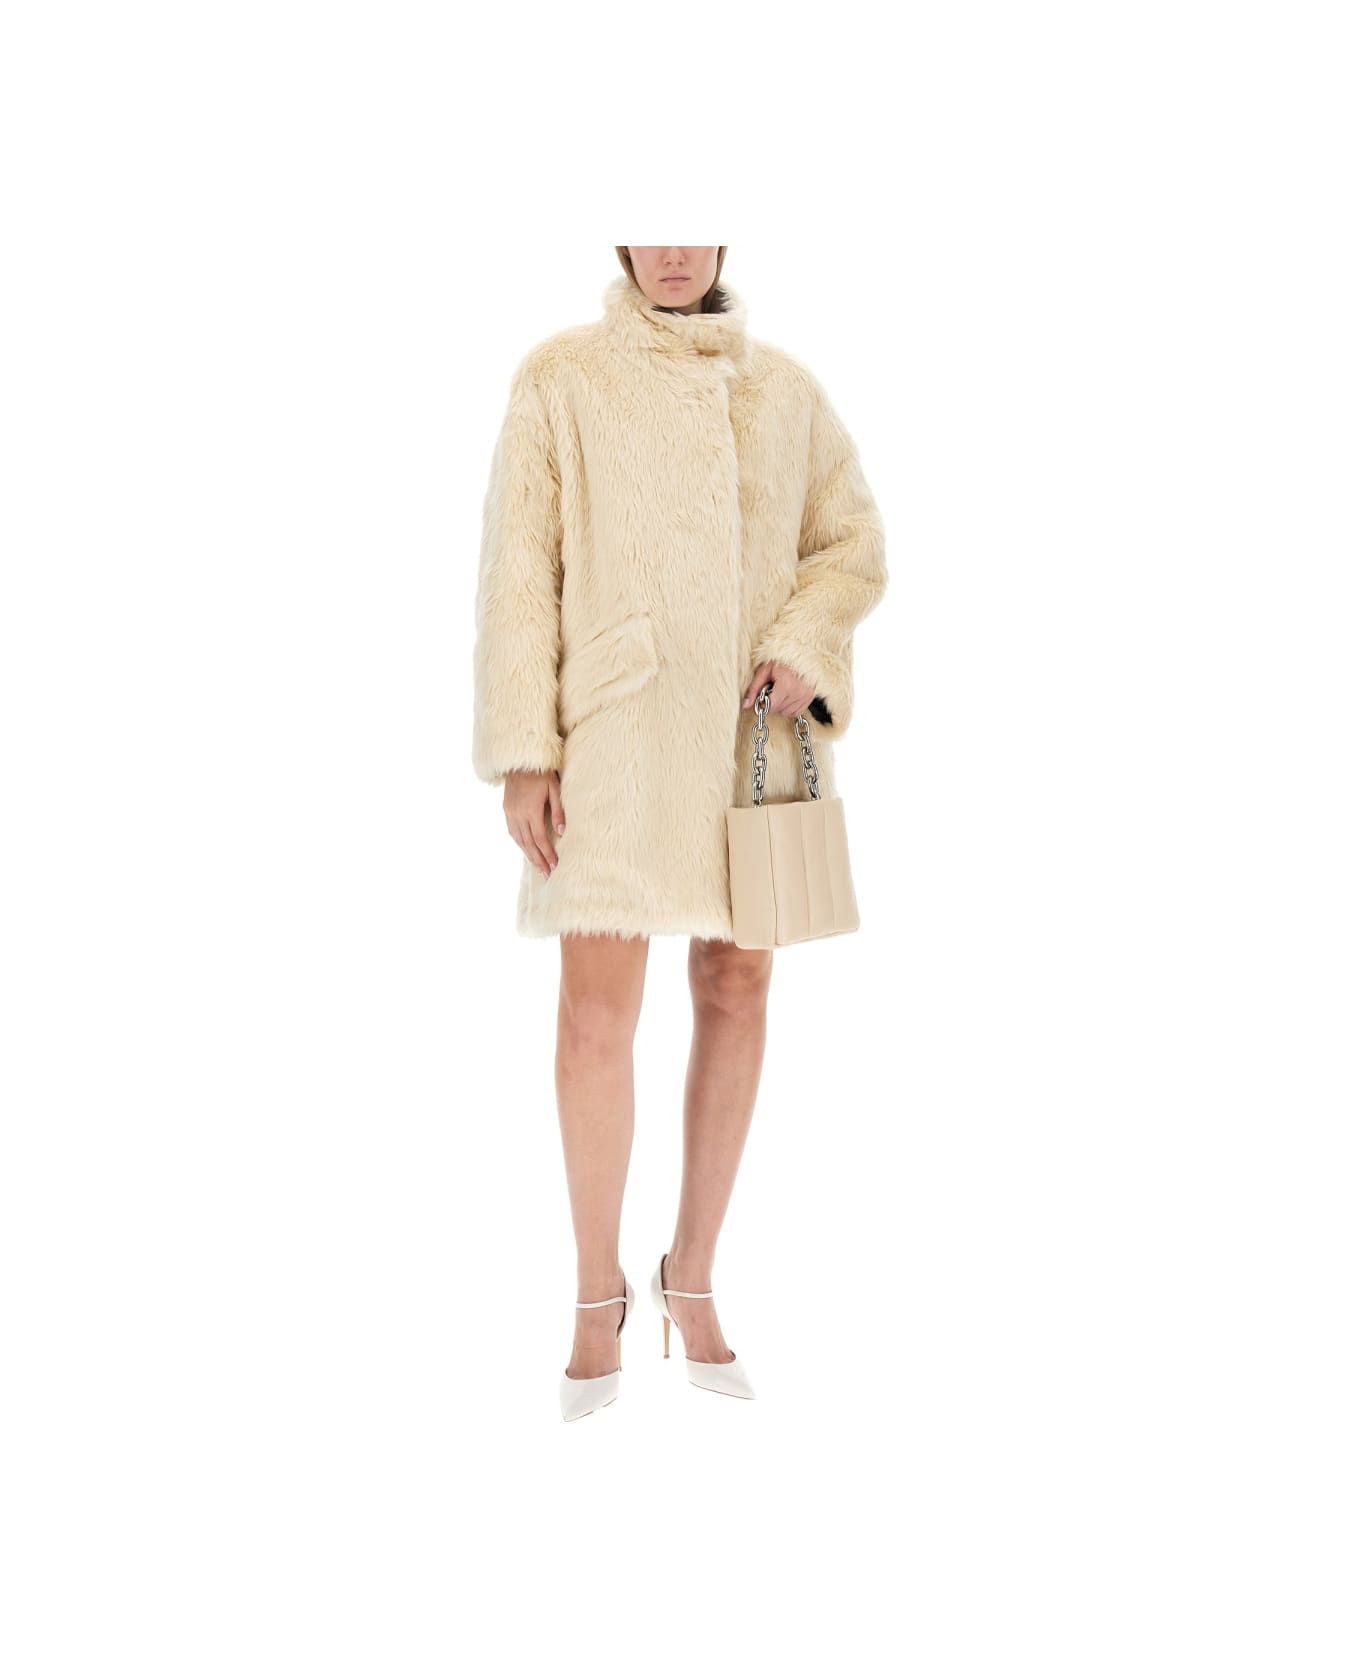 STAND STUDIO Coat With Pockets "woman" - IVORY